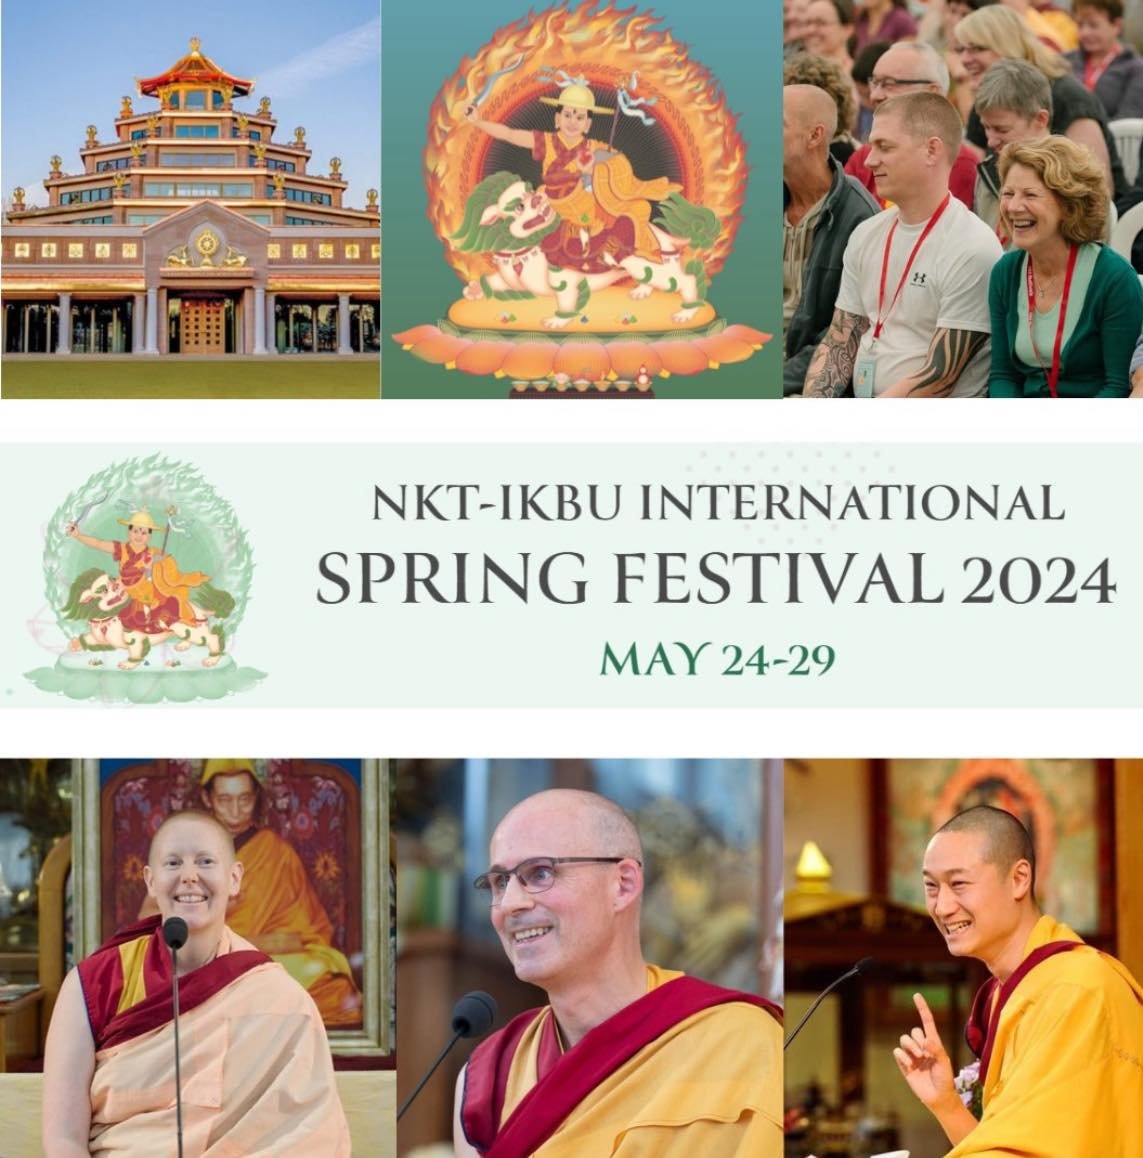 The International Spring Festival is coming up next weekend! May 24 to 29 at Manjushri KMC in the UK. And also available online to enjoy in the comfort of your home, with replay available until June 12. 

Learn more at: https://kadampafestivals.org/s